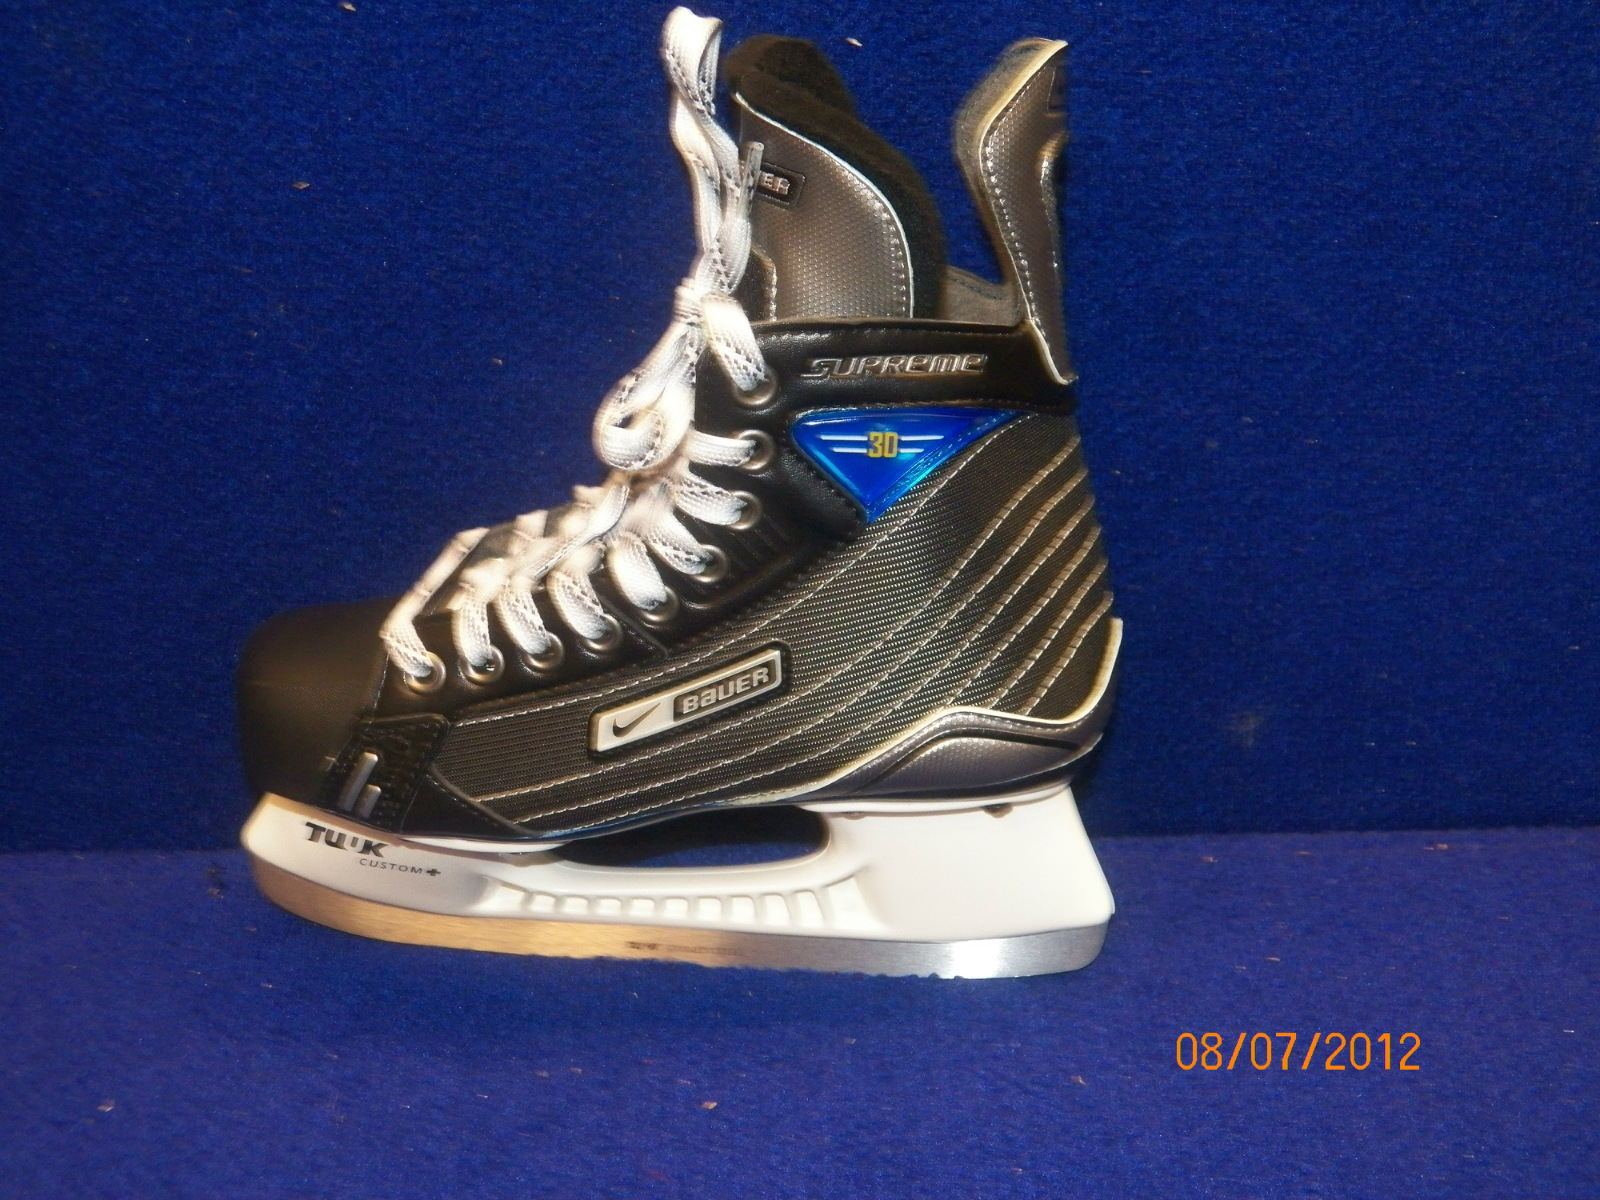 Download Nike Bauer Supreme 30 Ice hockey skates, The Corporal's Crease